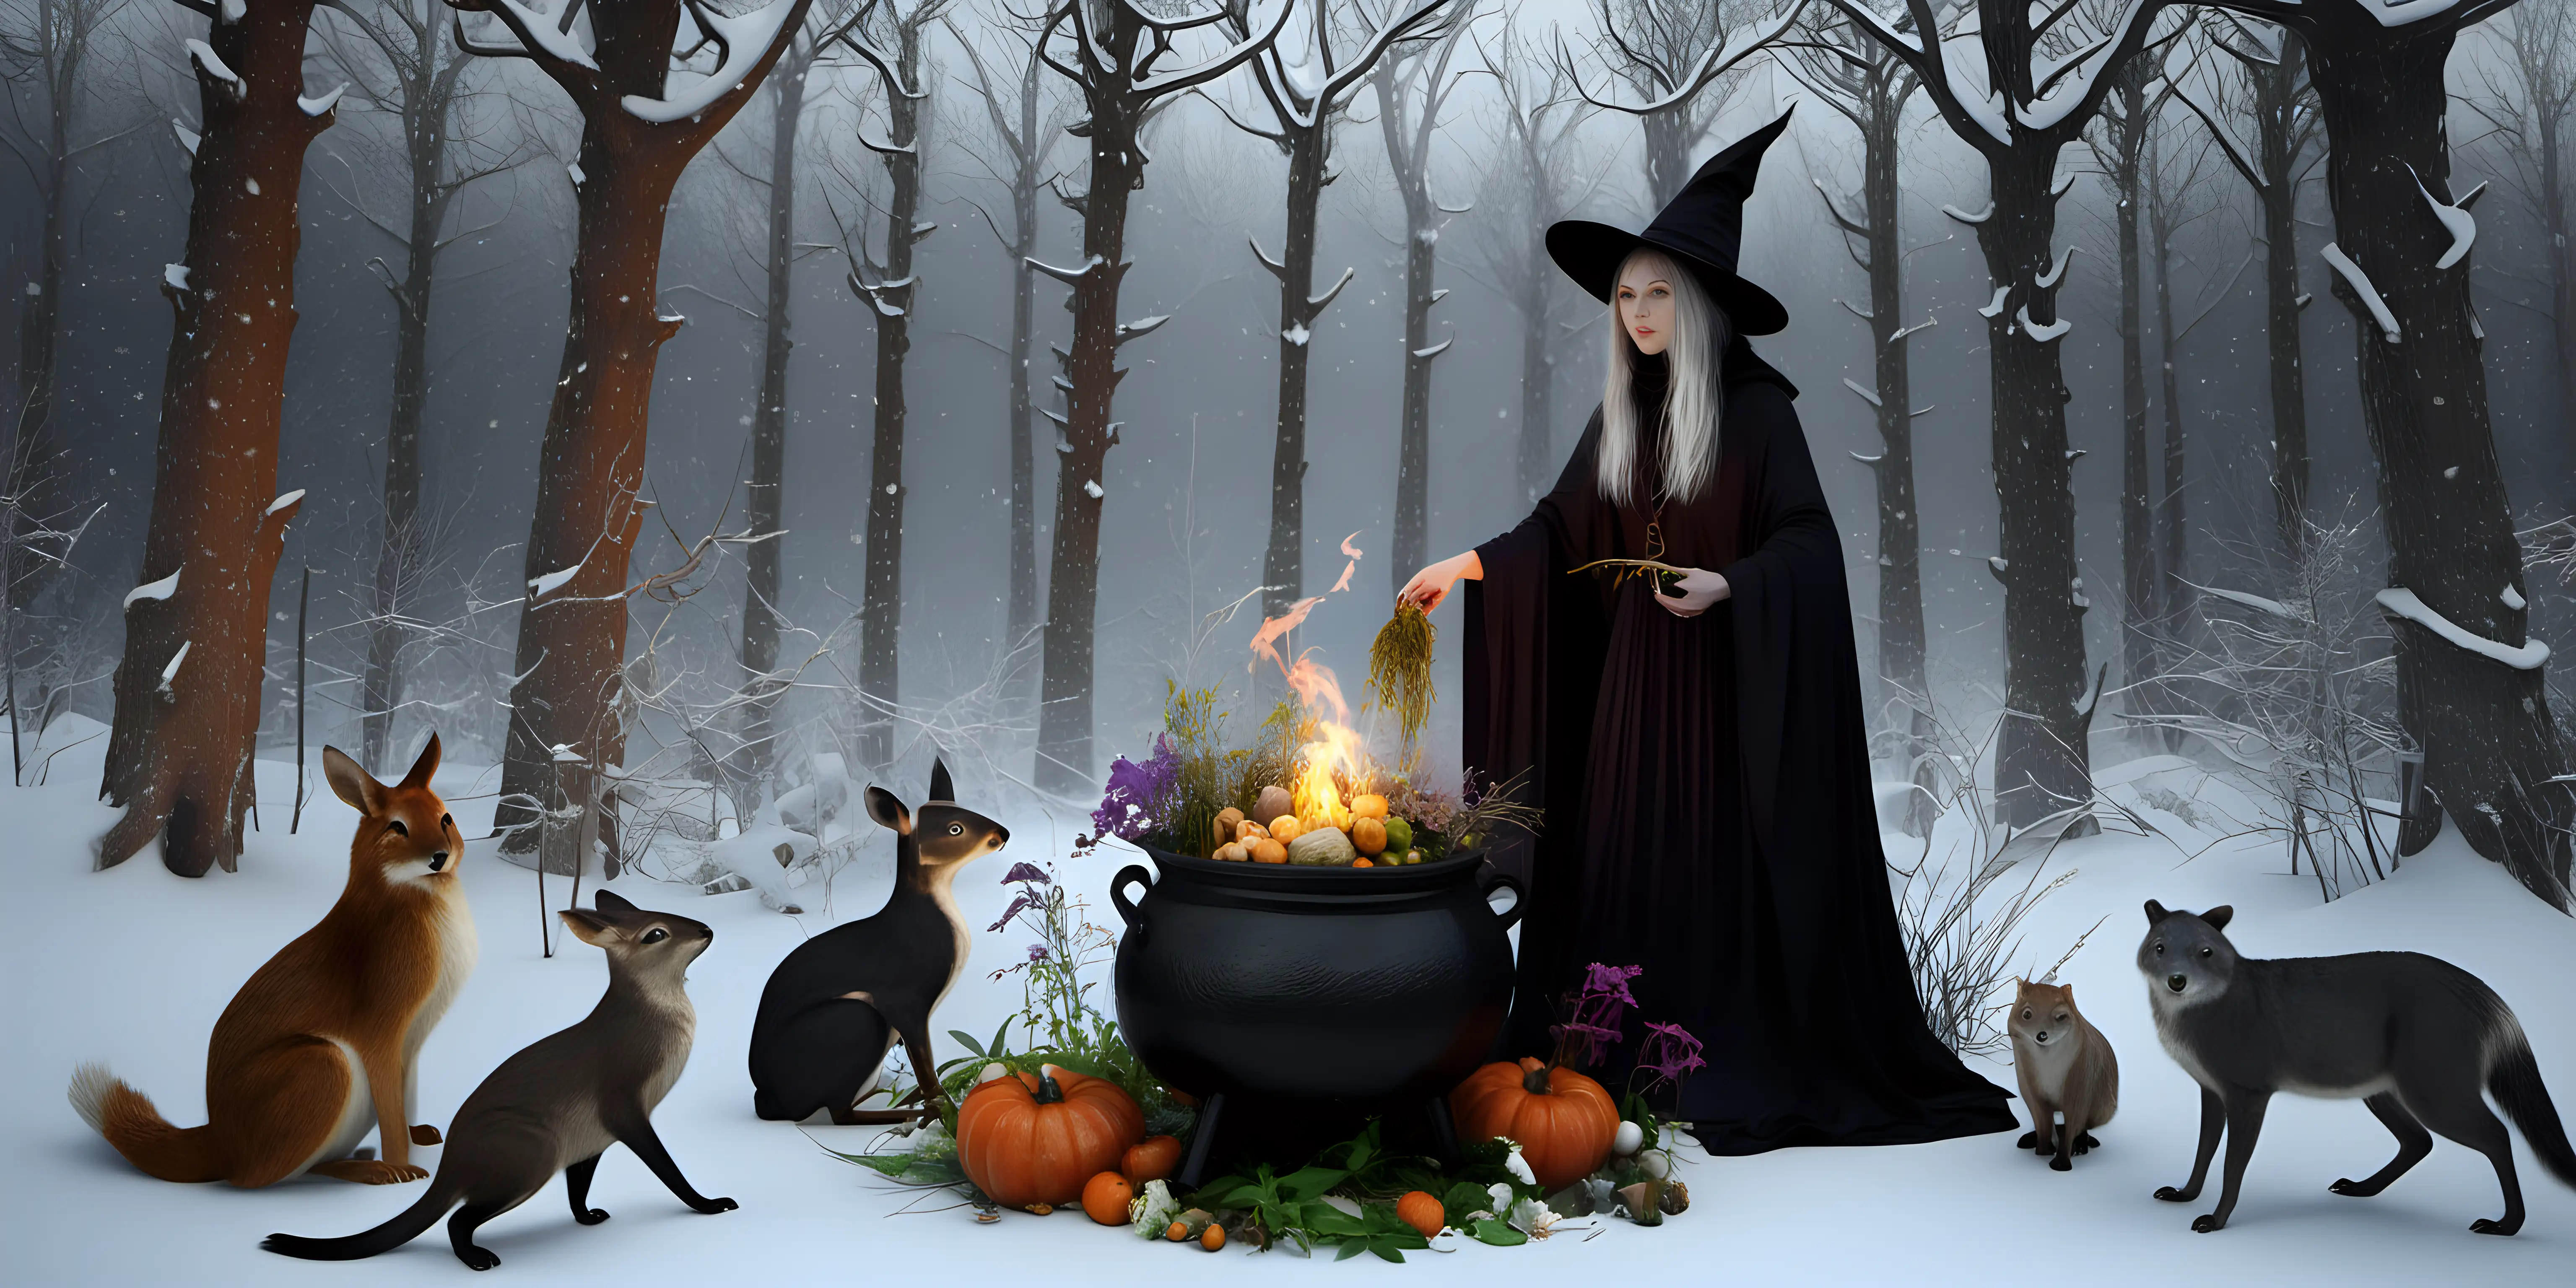 a witch in the ancient forest with all the forest animals around her in the snow,  She has a cauldron filled with herbs & flowers